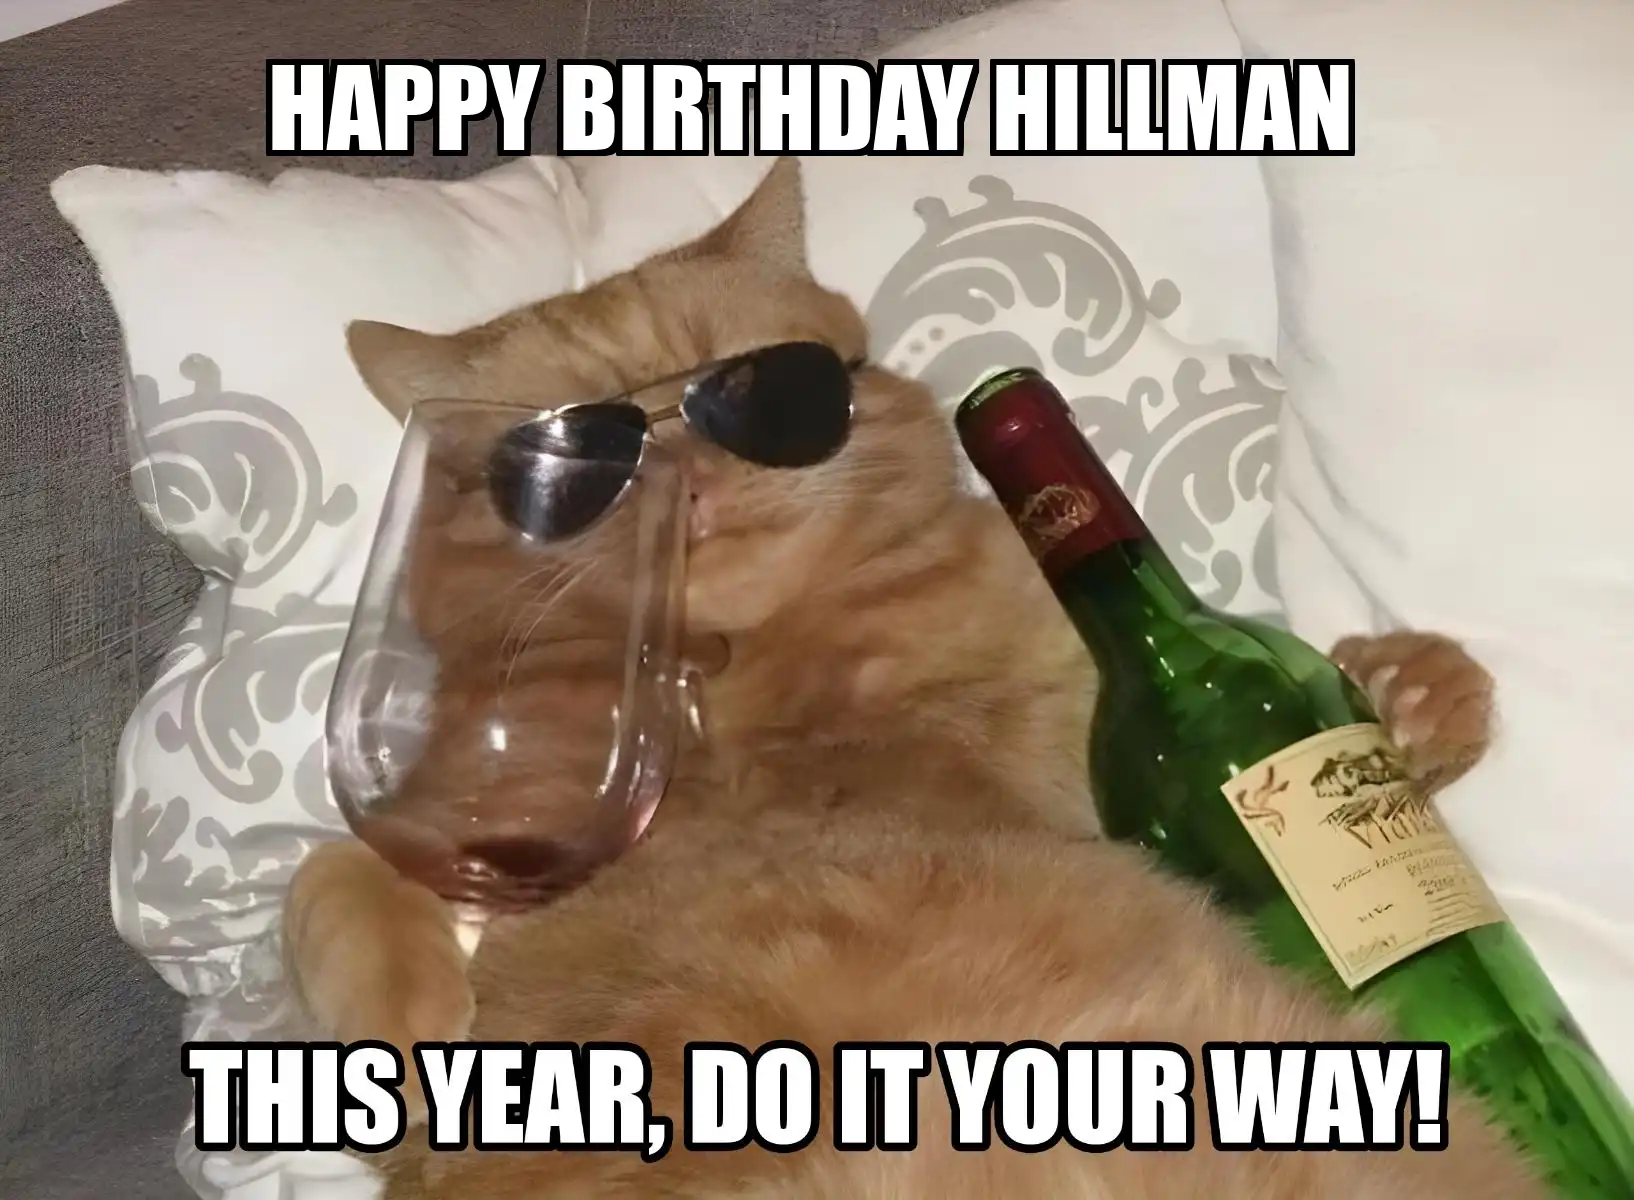 Happy Birthday Hillman This Year Do It Your Way Meme